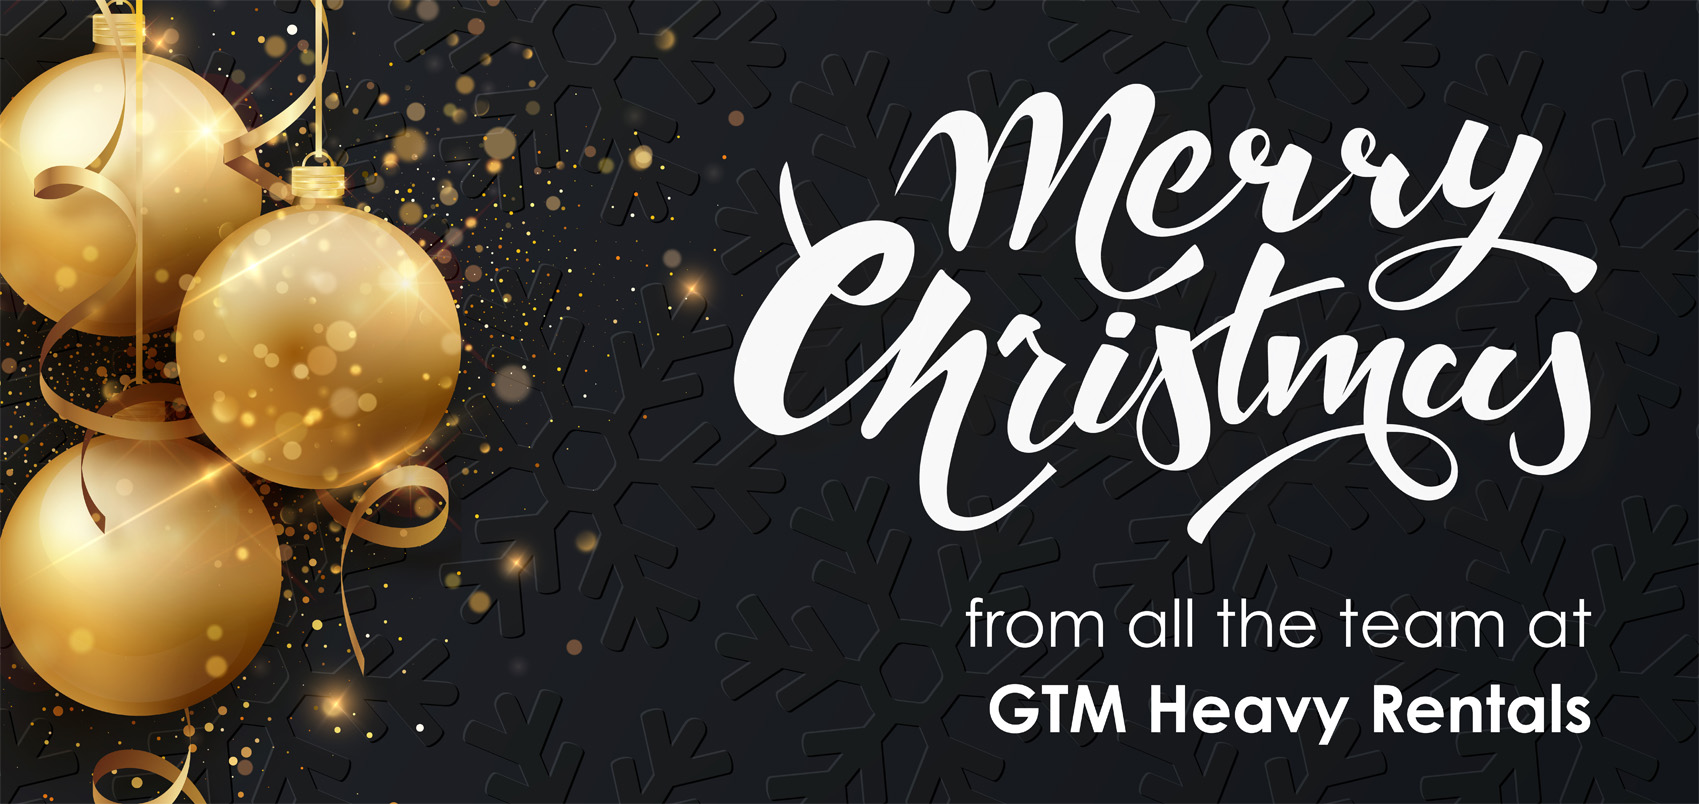 christmas message from gtm